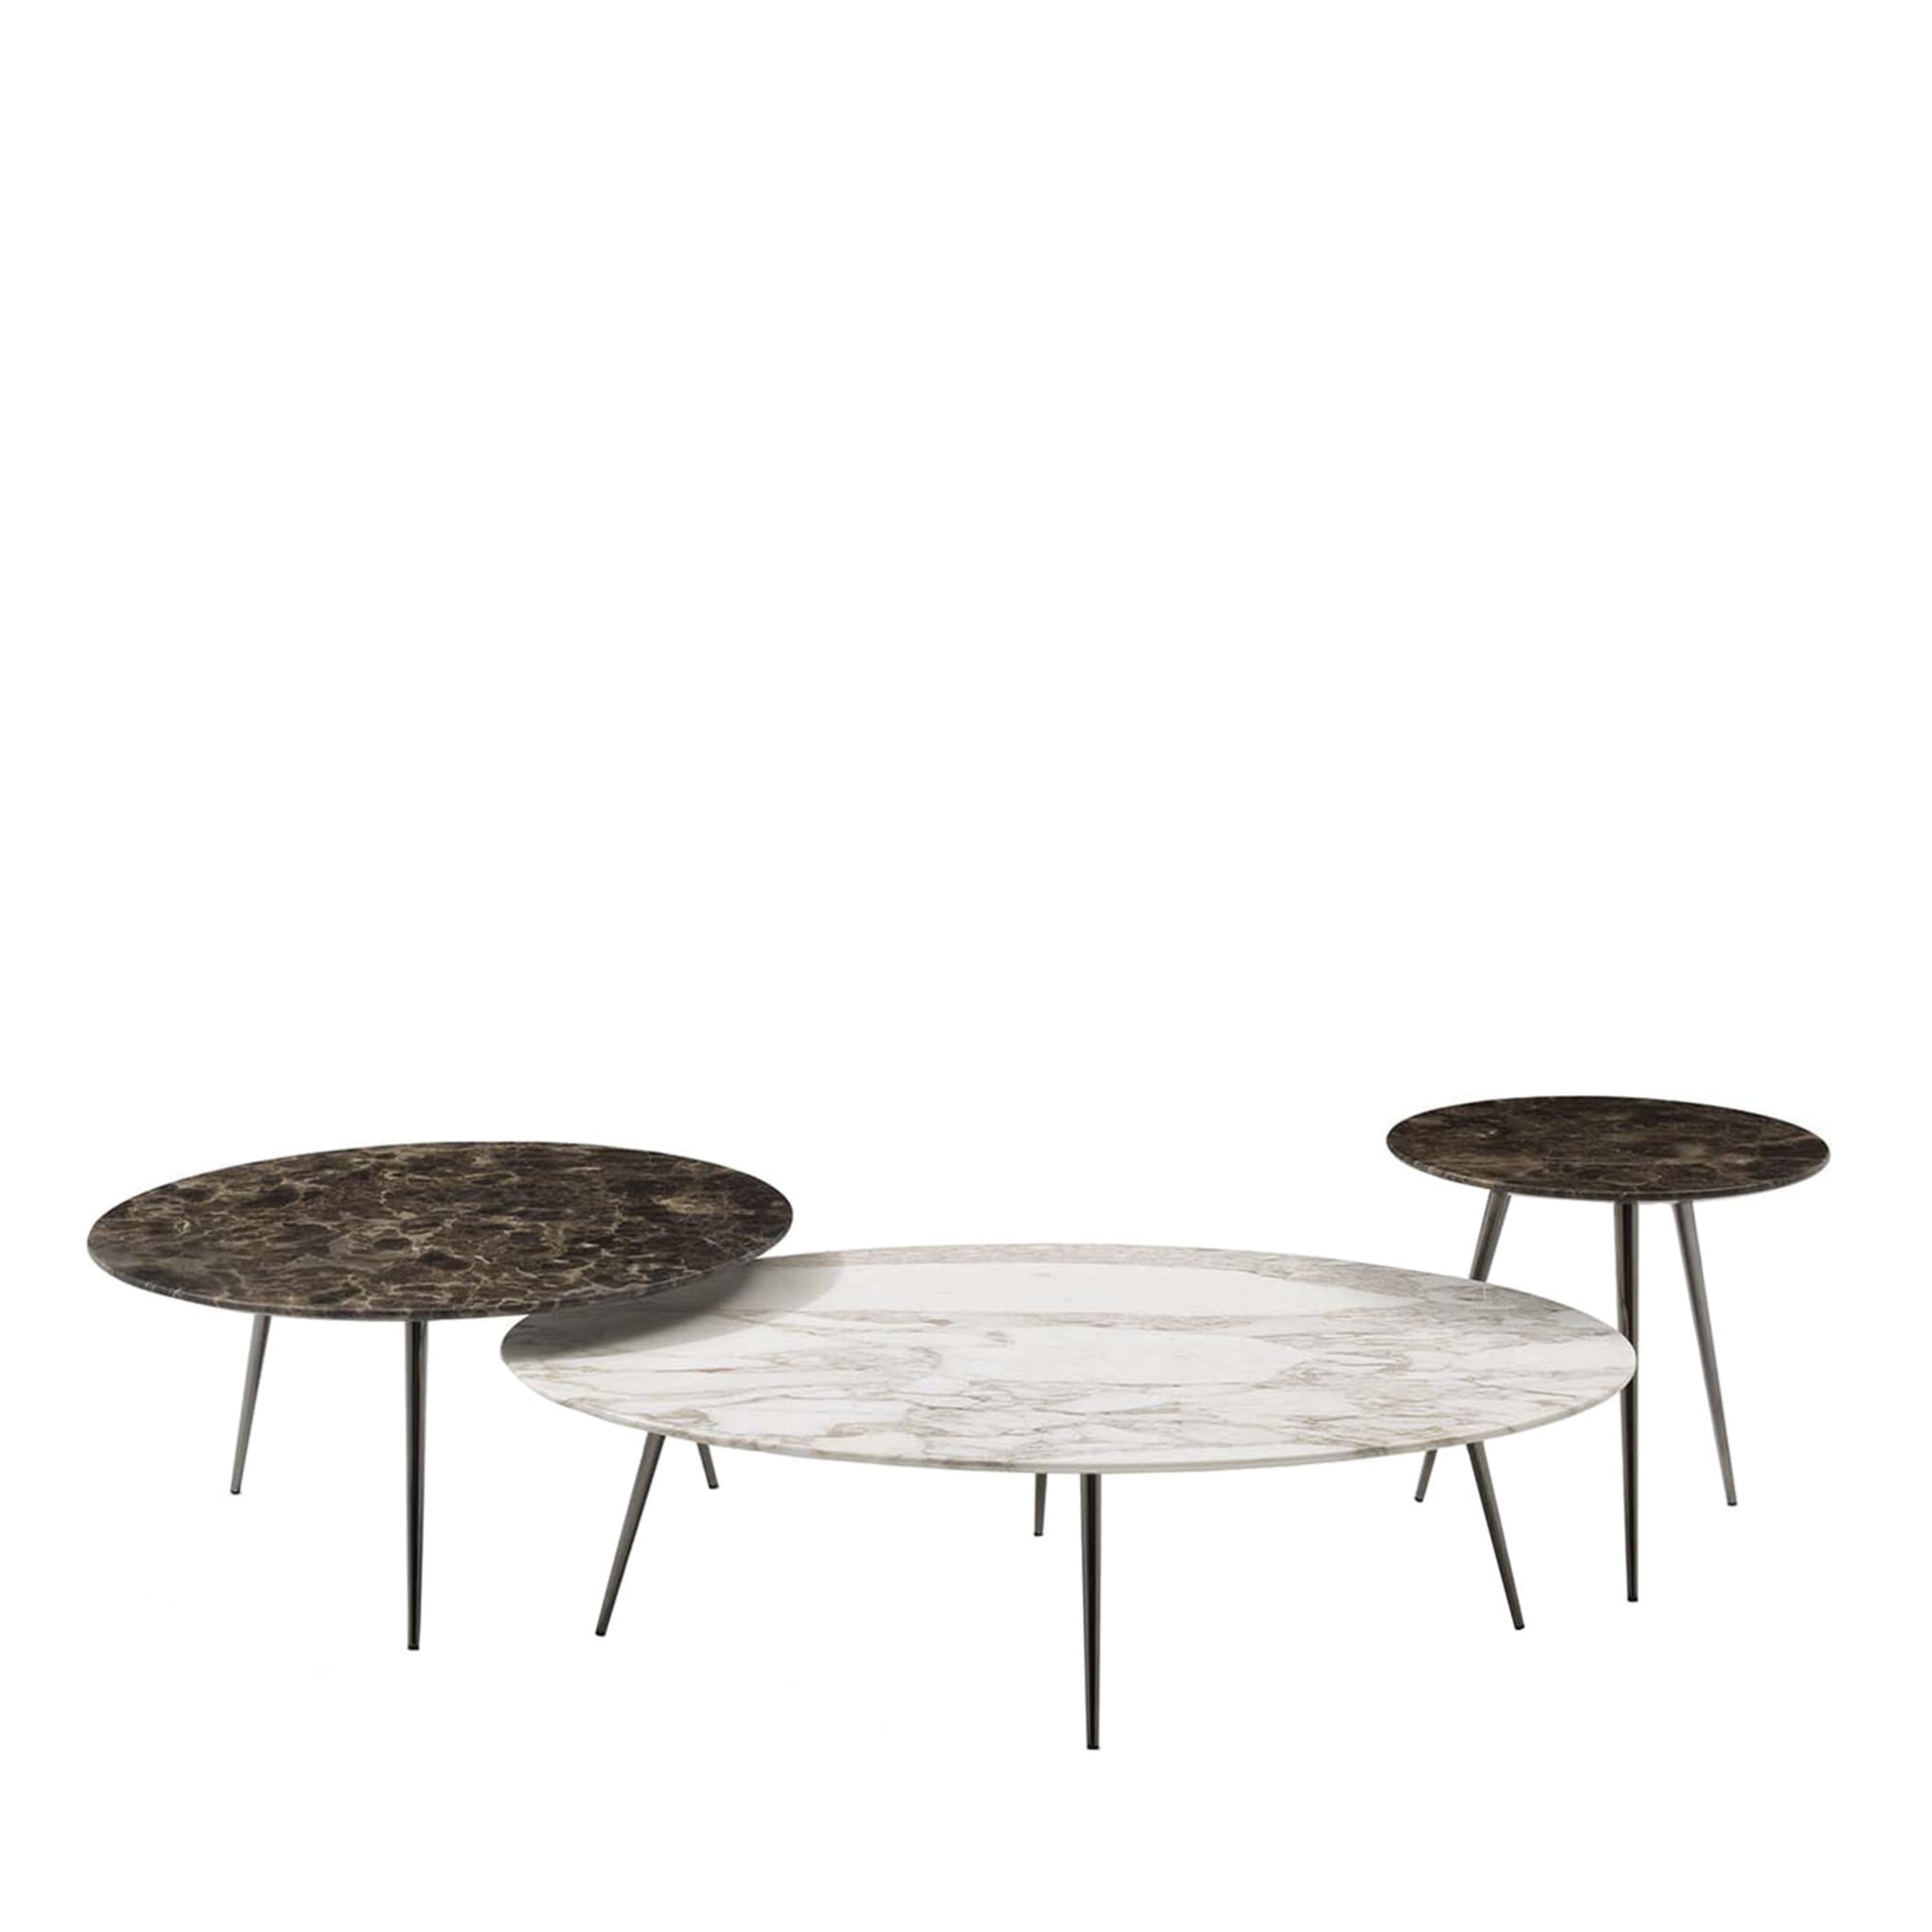 Set of 3 Cinquanta Oval Nesting Tables - Main view